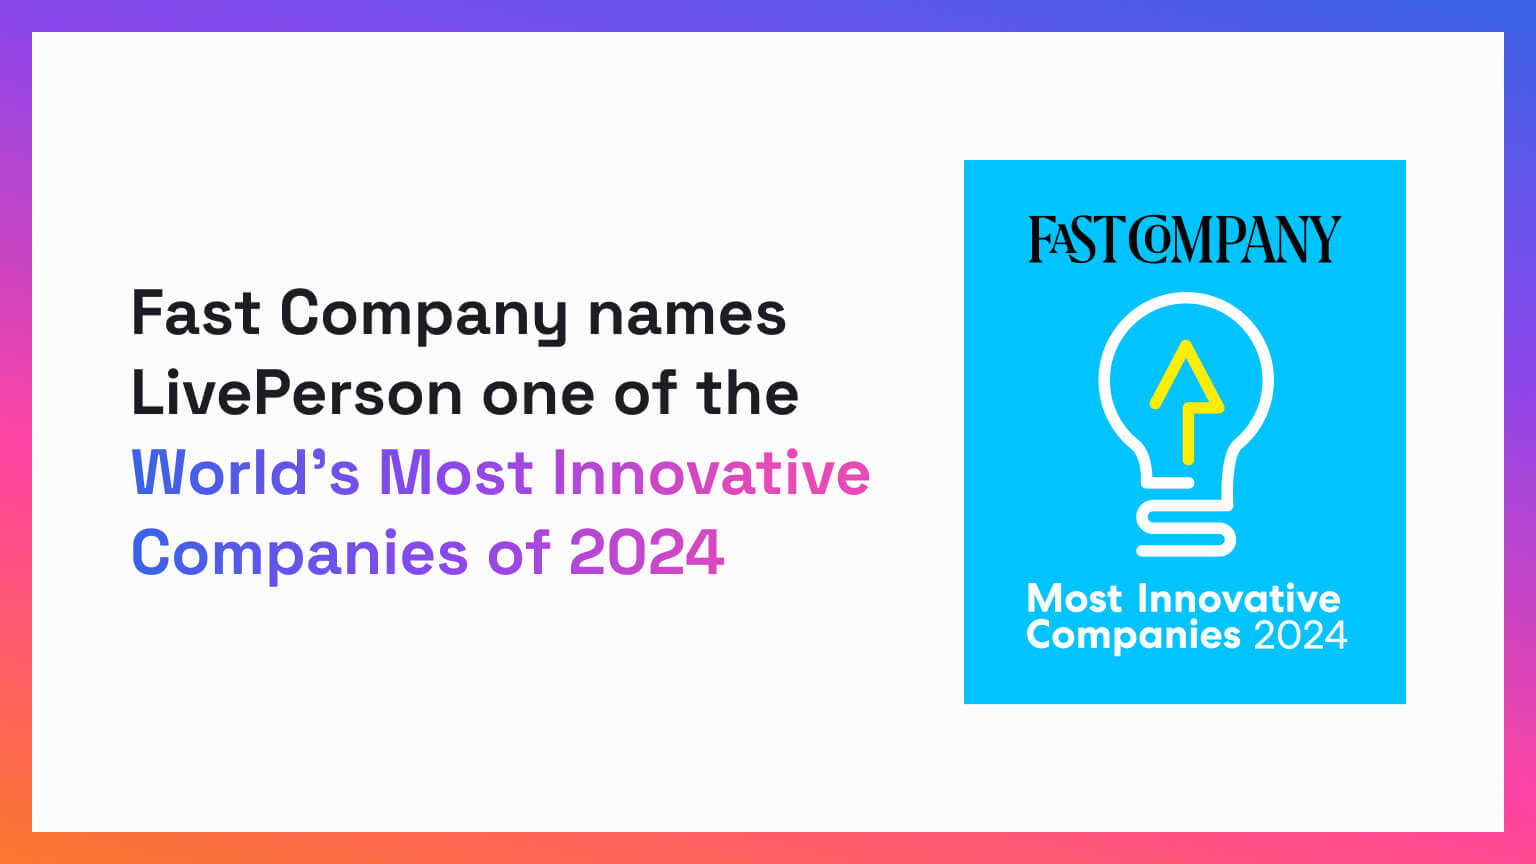 Badge for being named one of the most innovative companies in the world by Fast Company in 2024